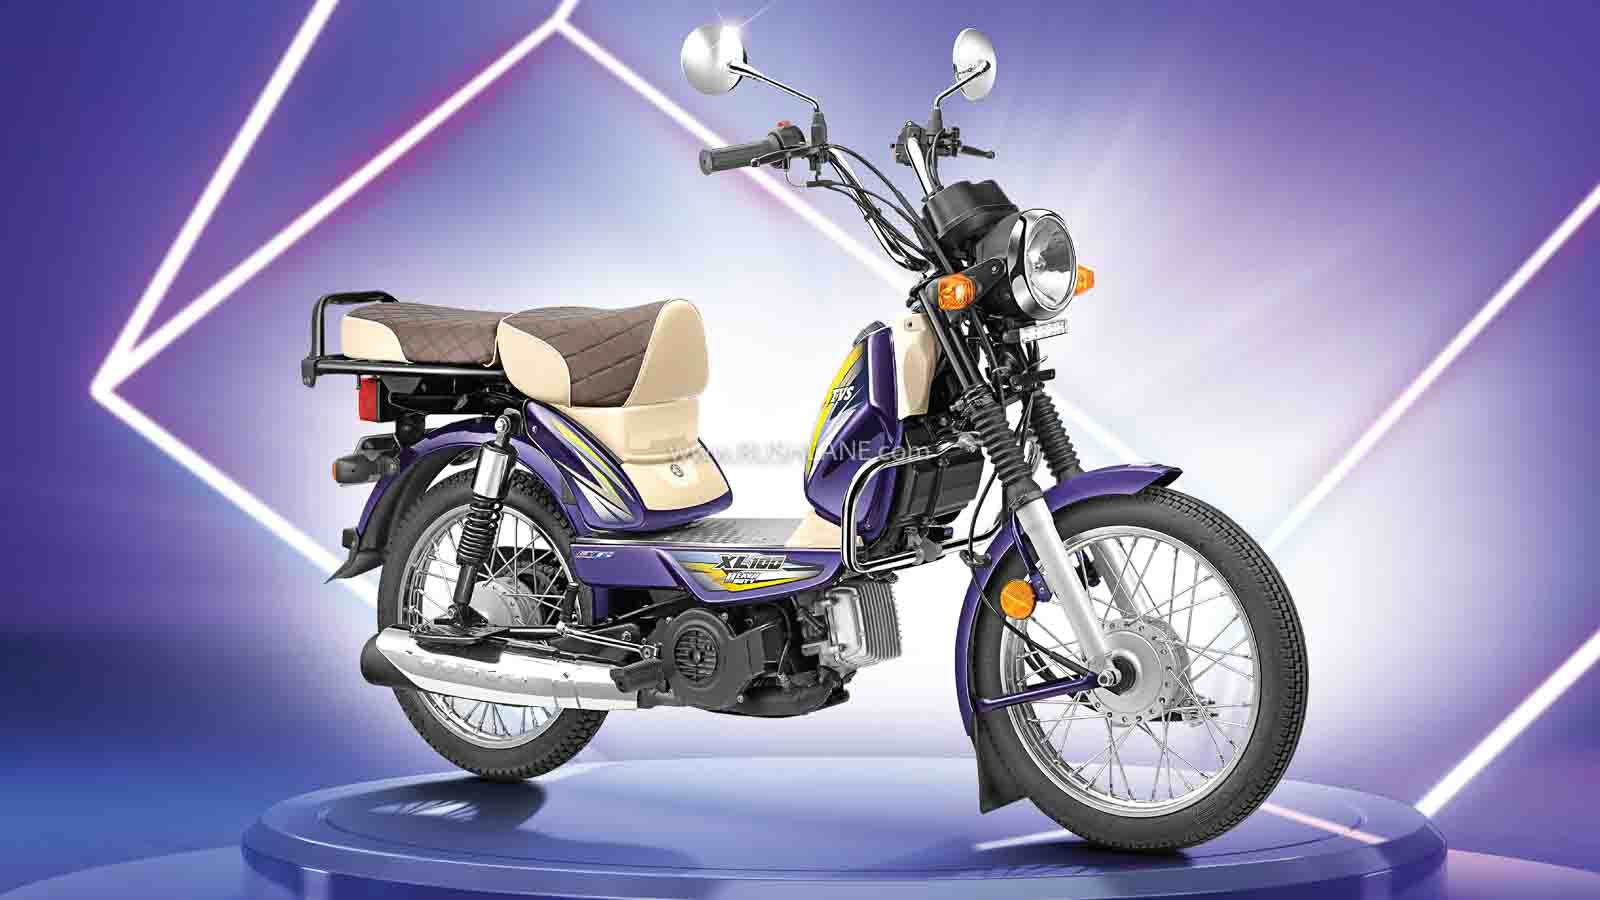 TVS Launches Winner Edition Of Their Best Selling Two Wheeler - XL 100 ...
